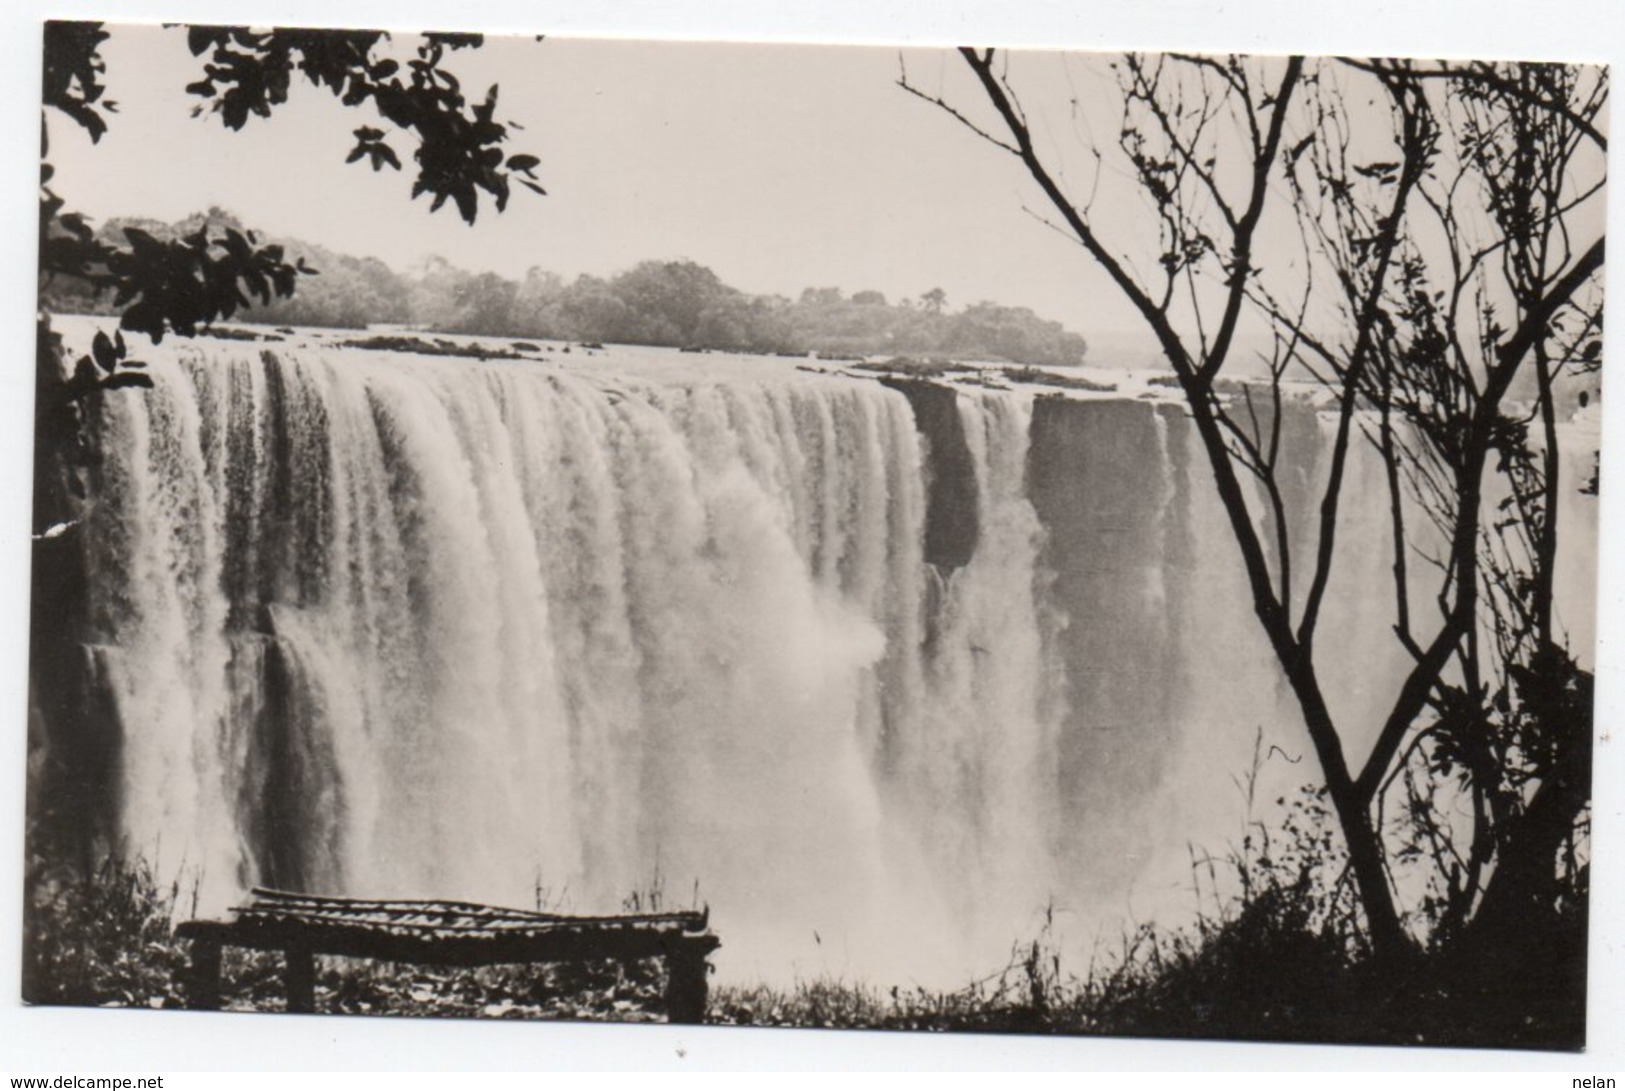 VICTORIA FALLS-A VIEW OF THE MAIN FALLS FROM THE RAIN FOREST - Zimbabwe